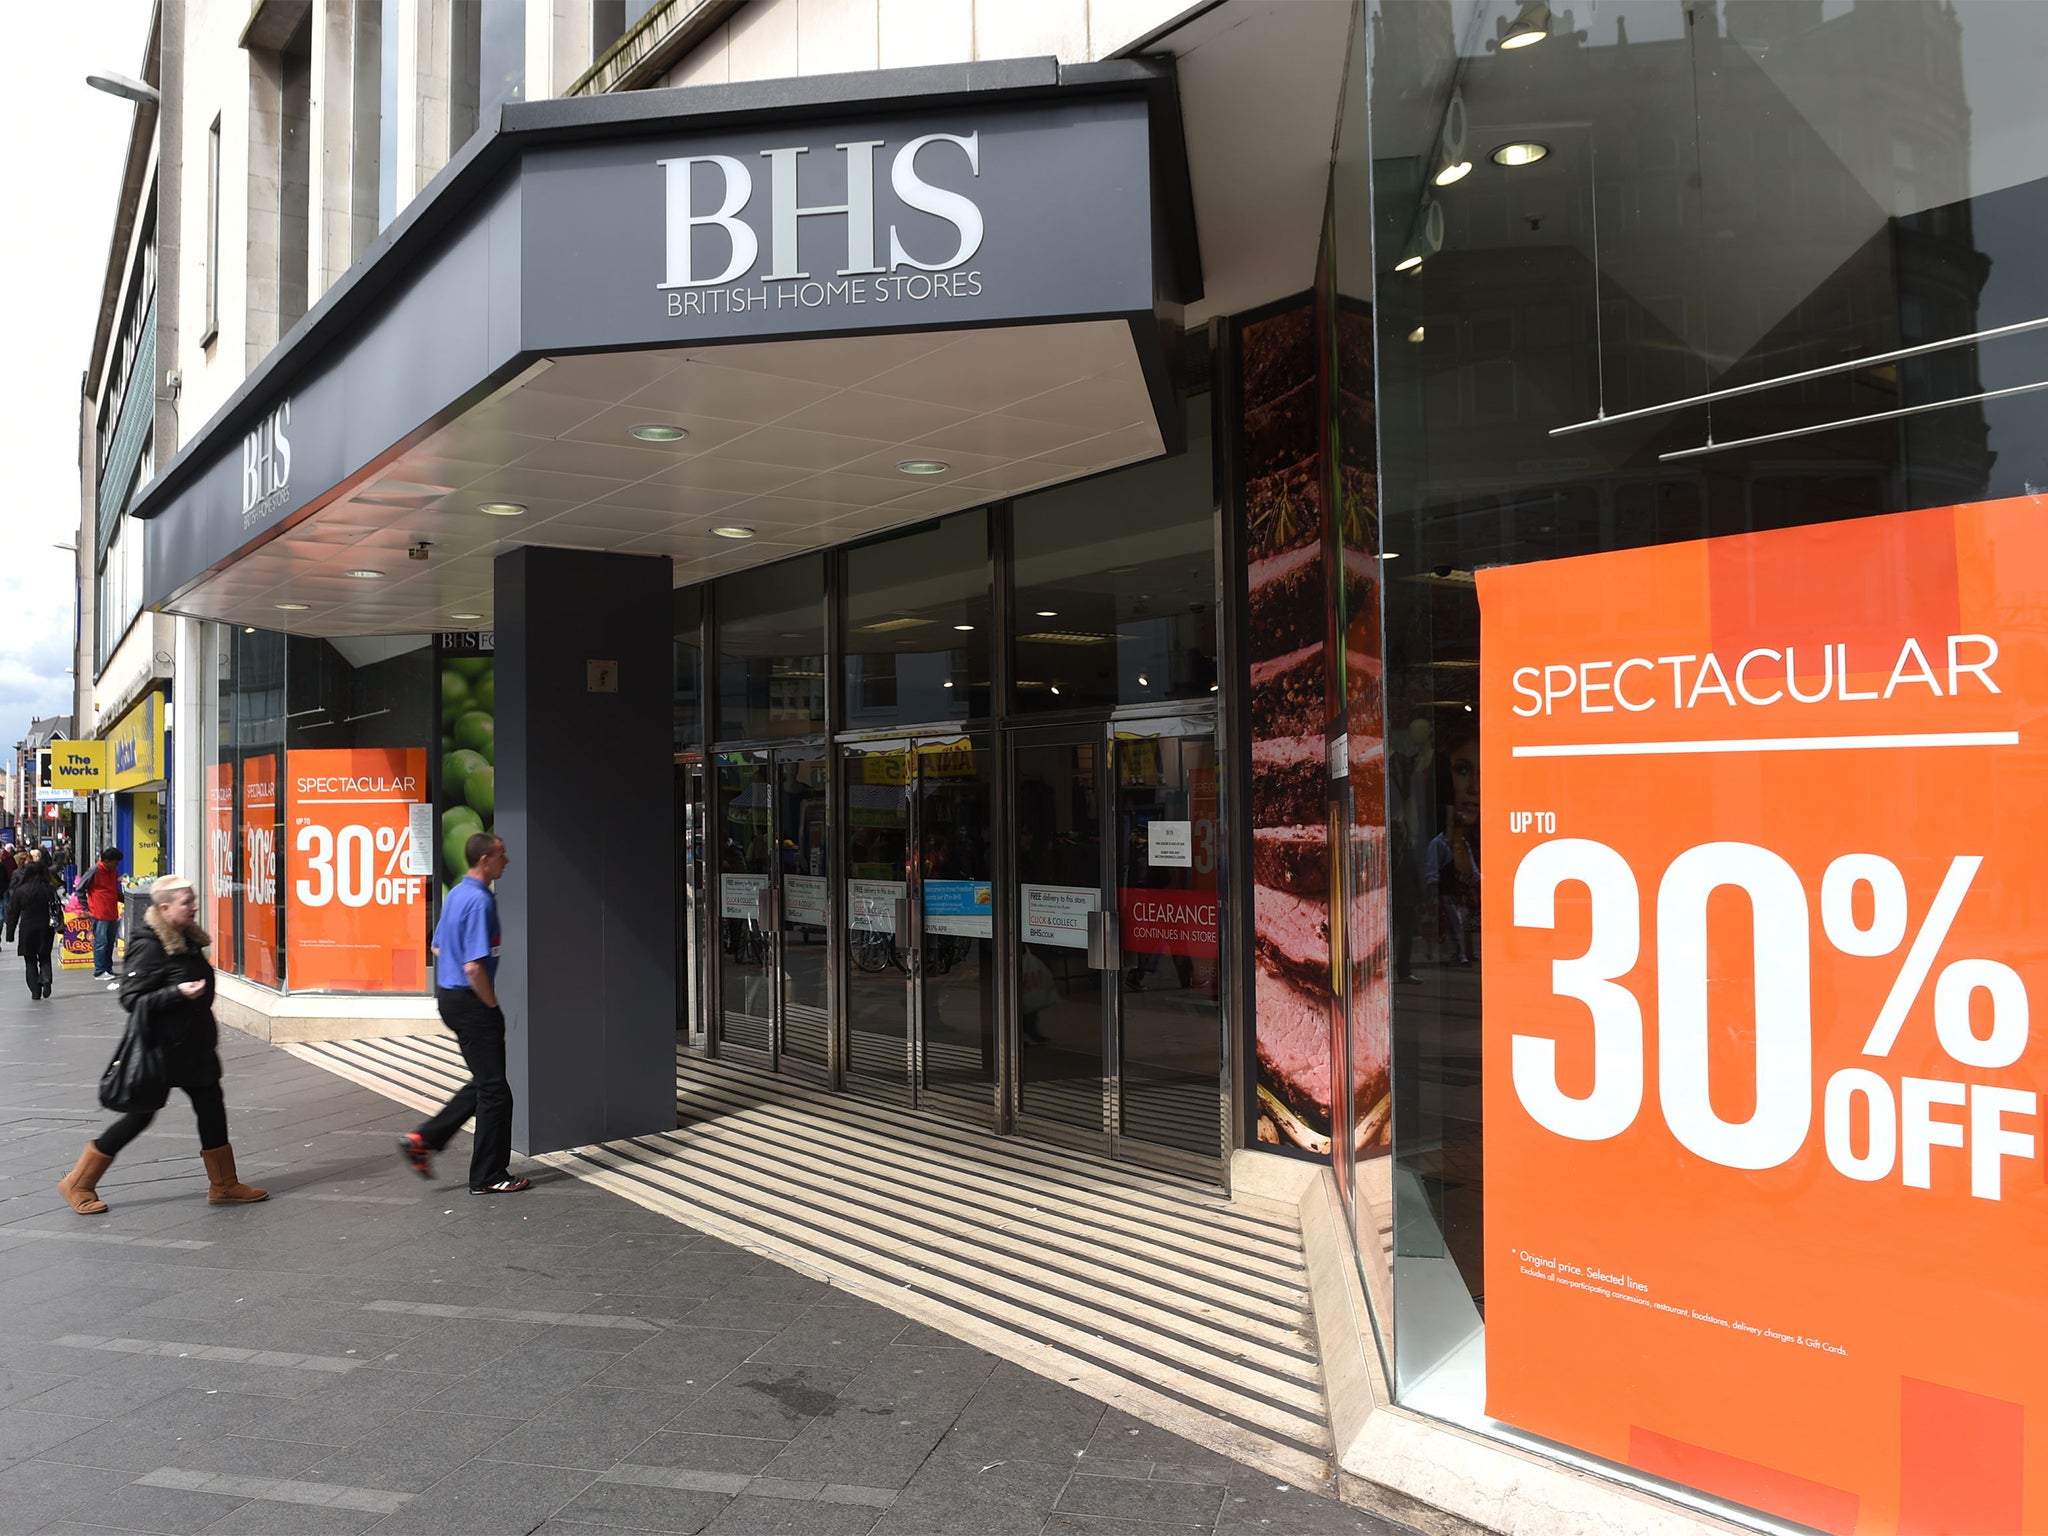 Sale signs in the window of a BHS branch in Leicester